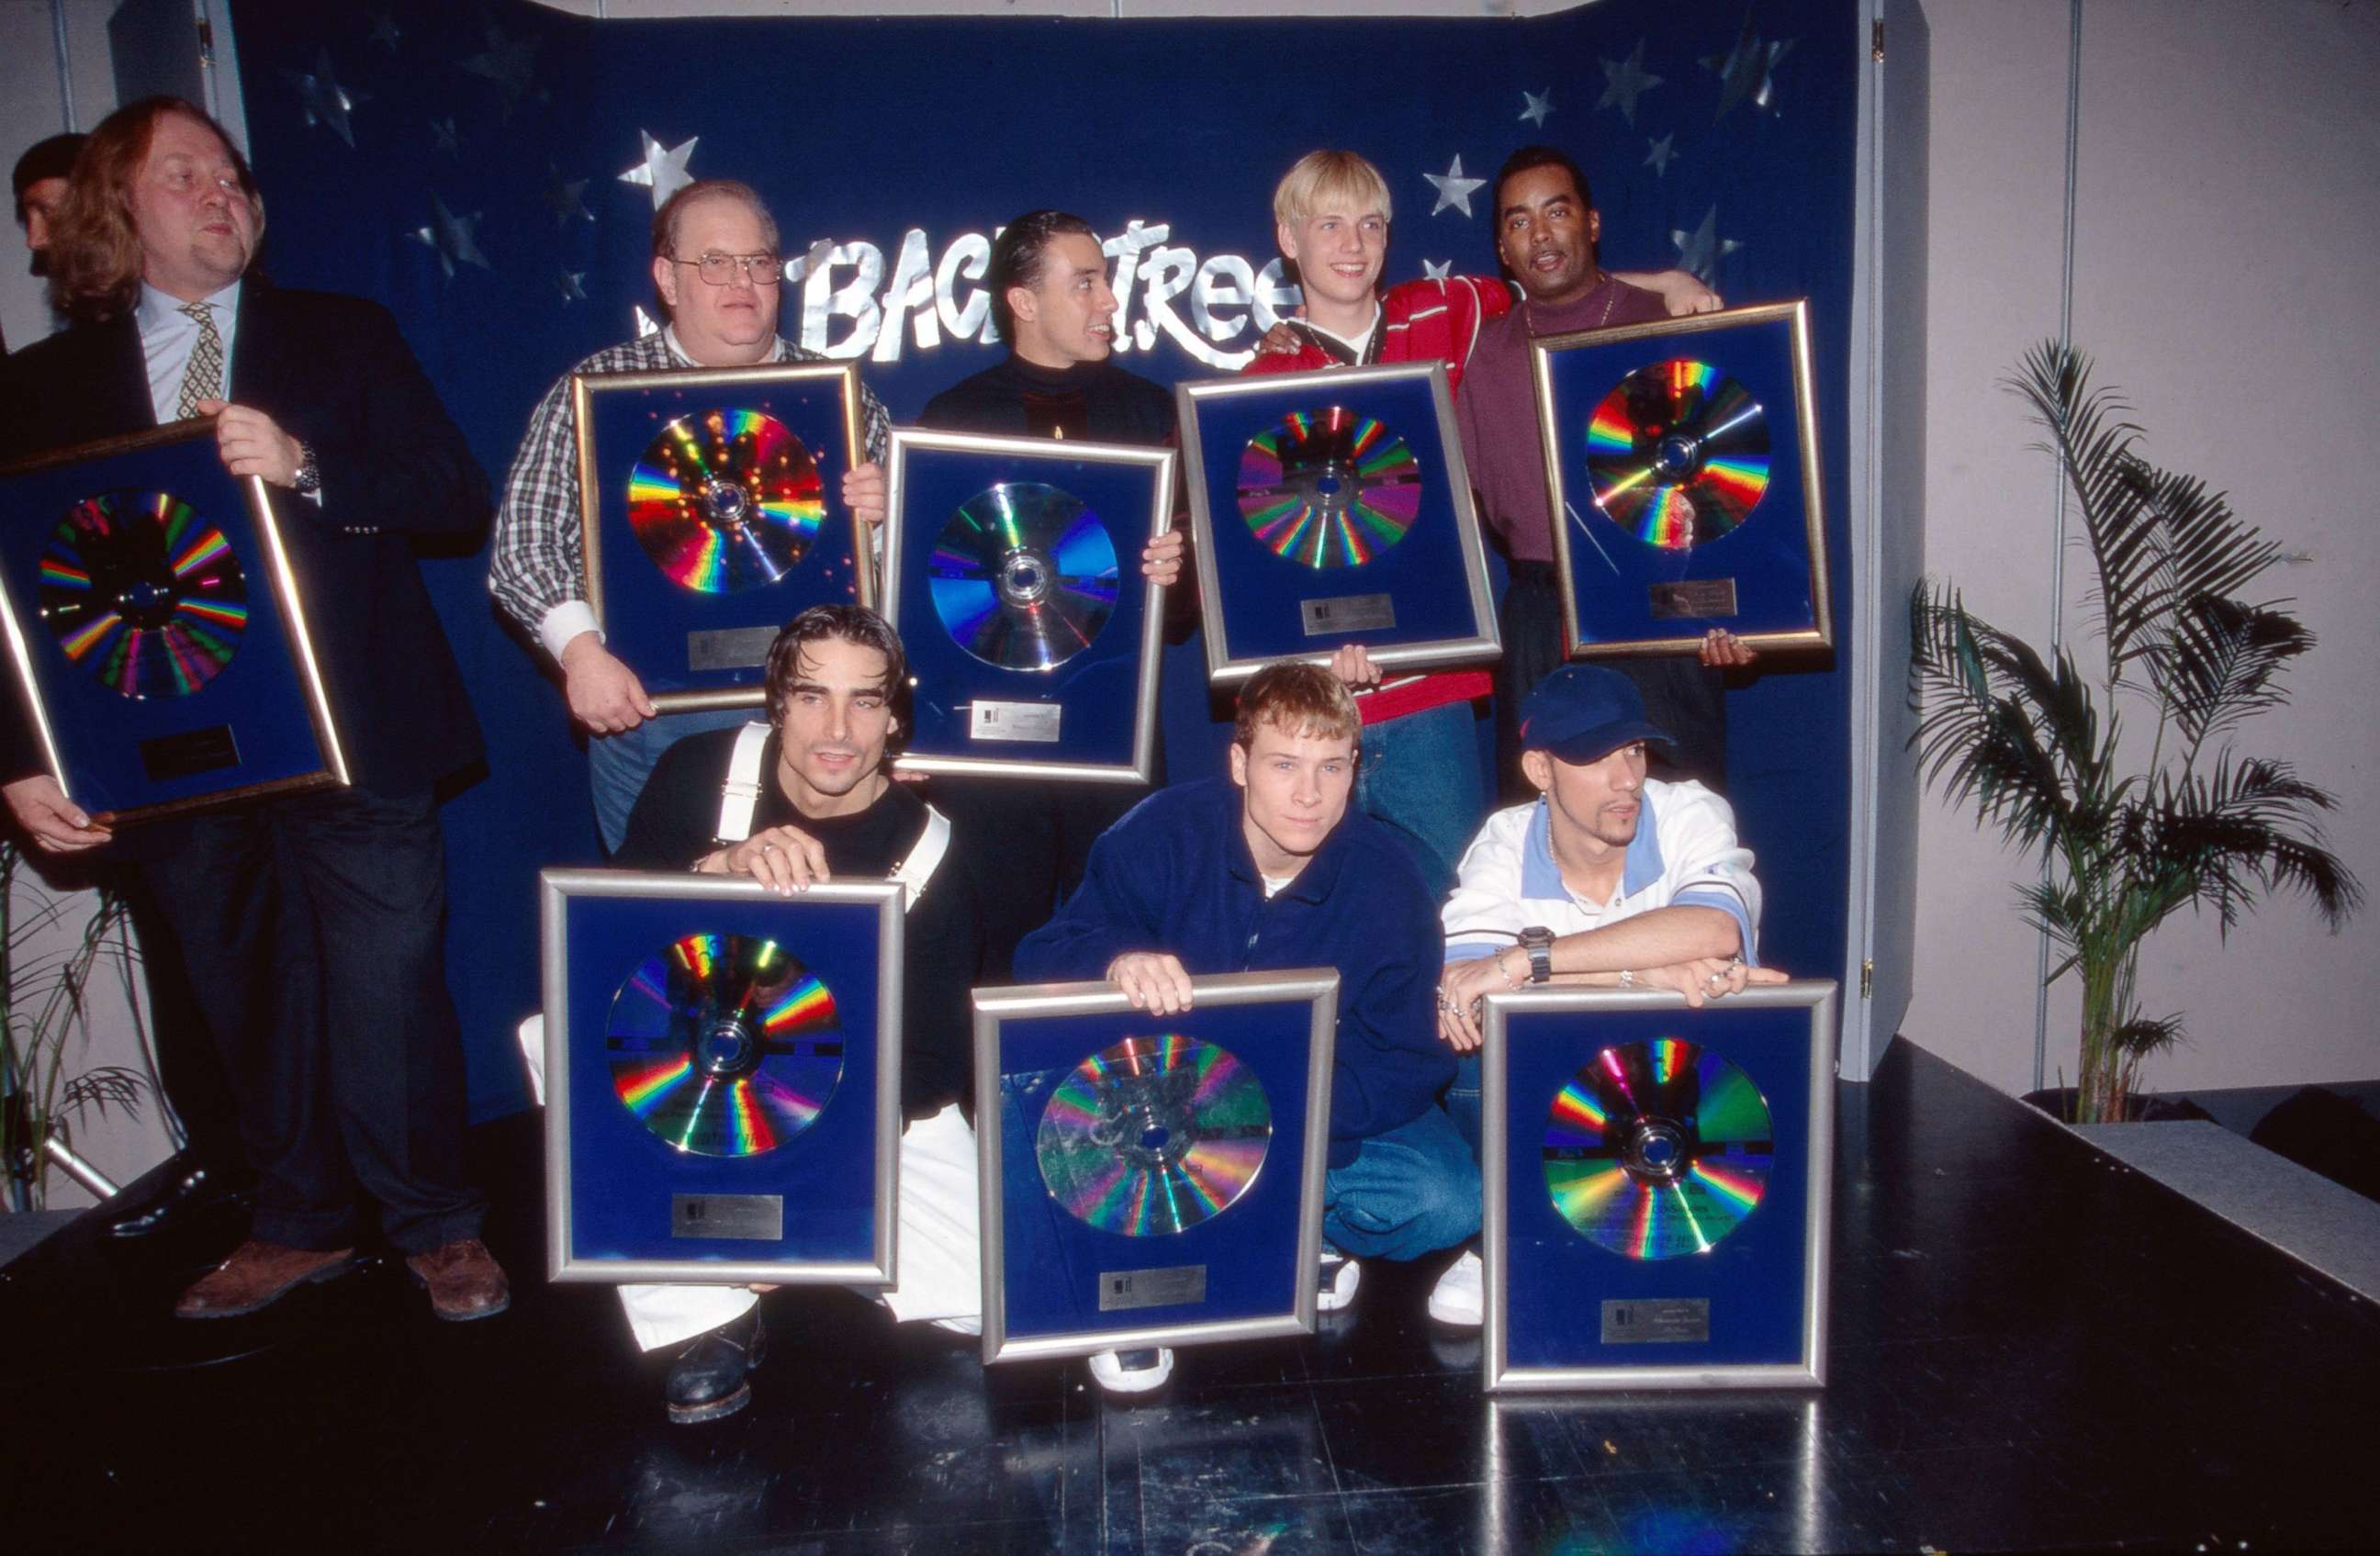 PHOTO: Lou Pearlman is shown with boy group "Backstreet Boys", in Munich, 1996.